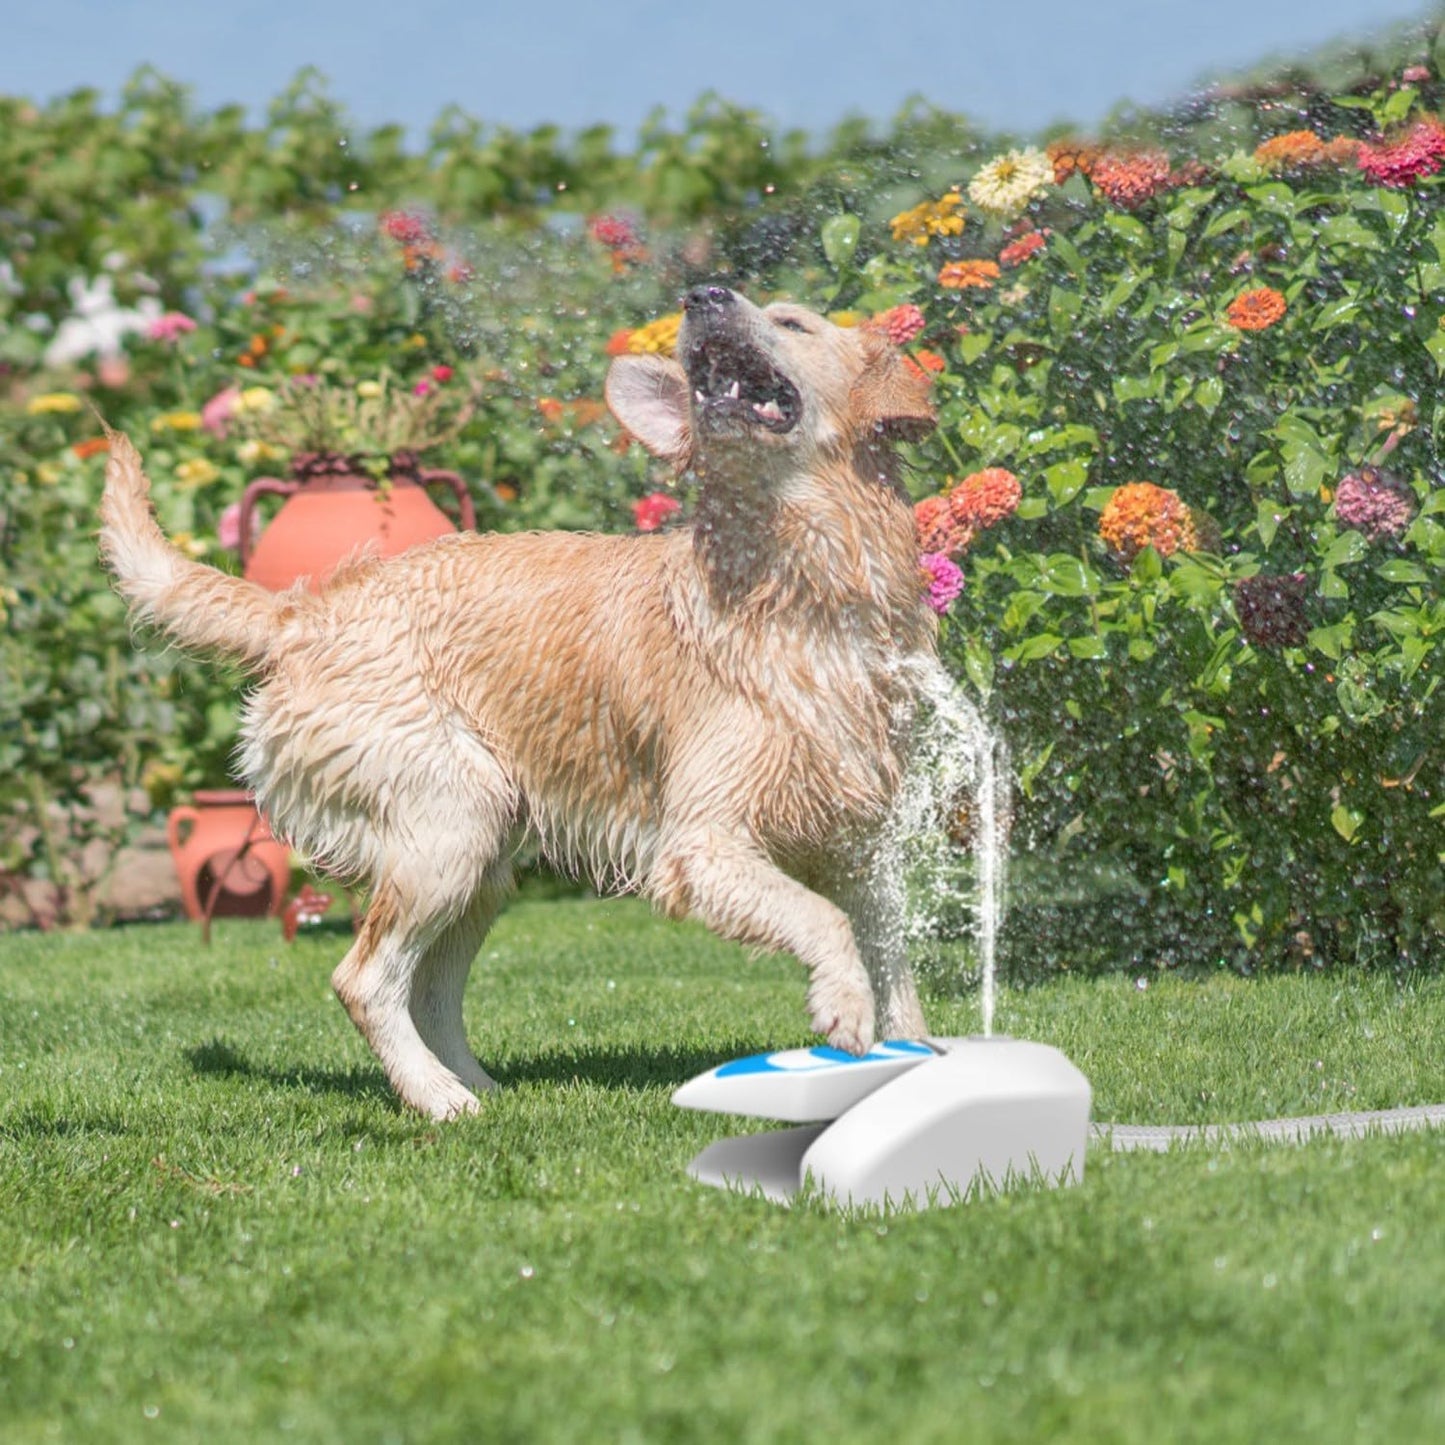 Dog Step On Paw Water Fountain